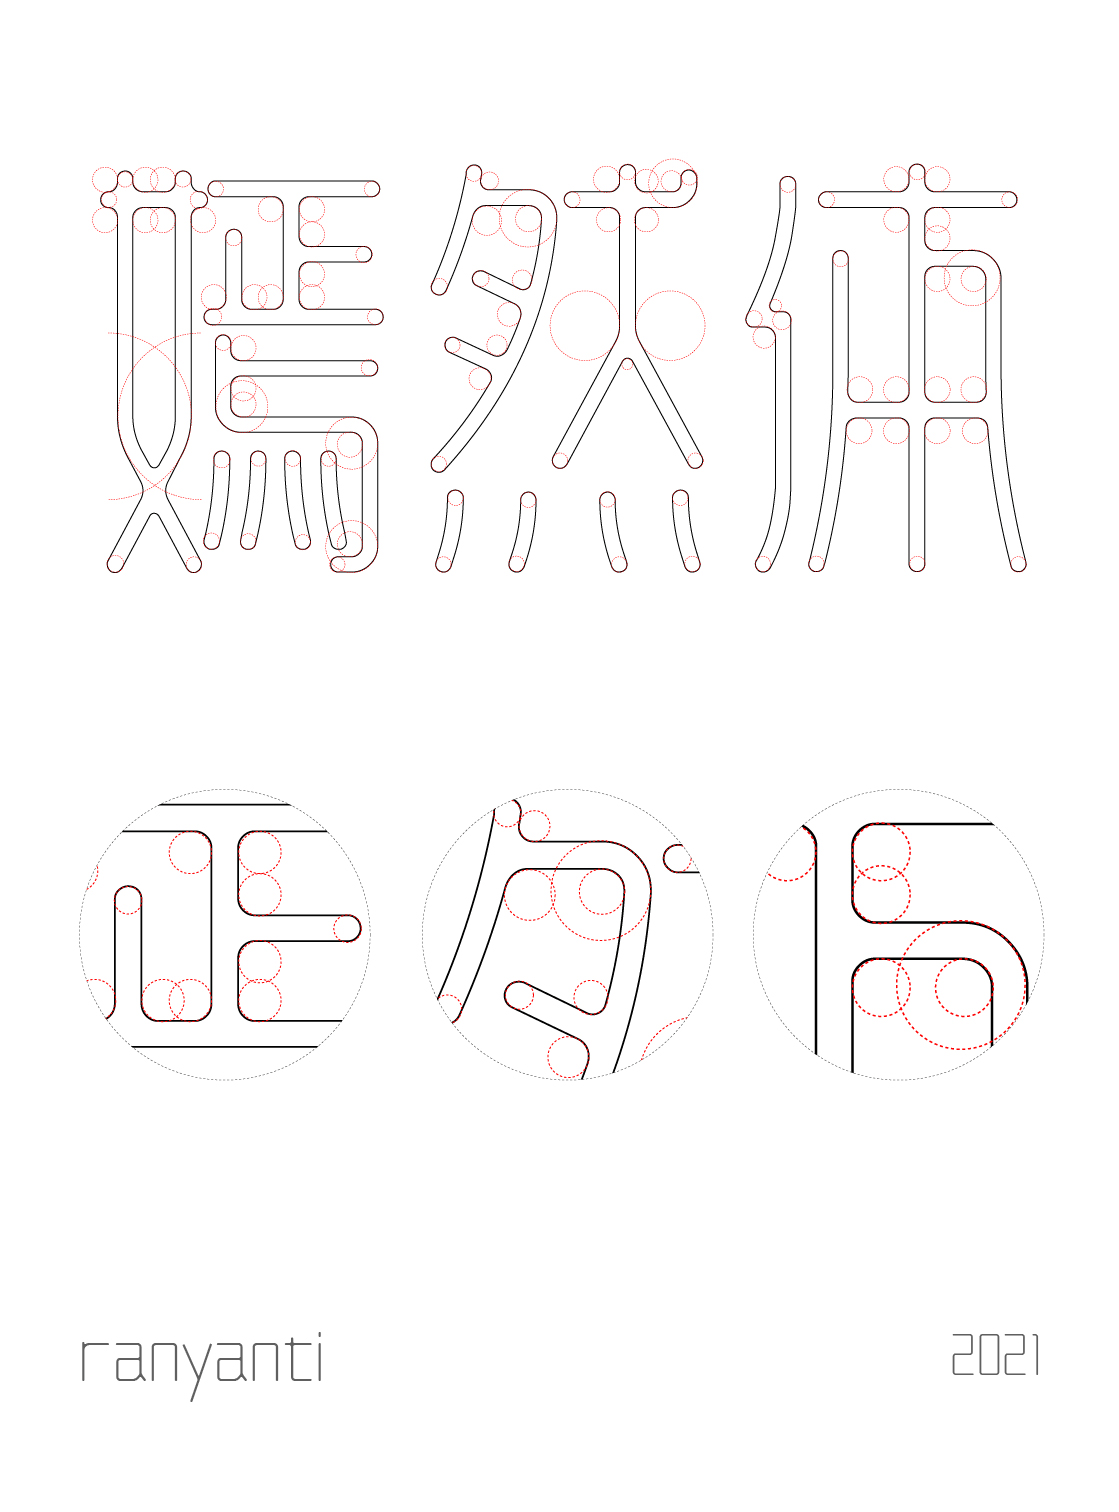 18P Collection of the latest Chinese font design schemes in 2021 #.481